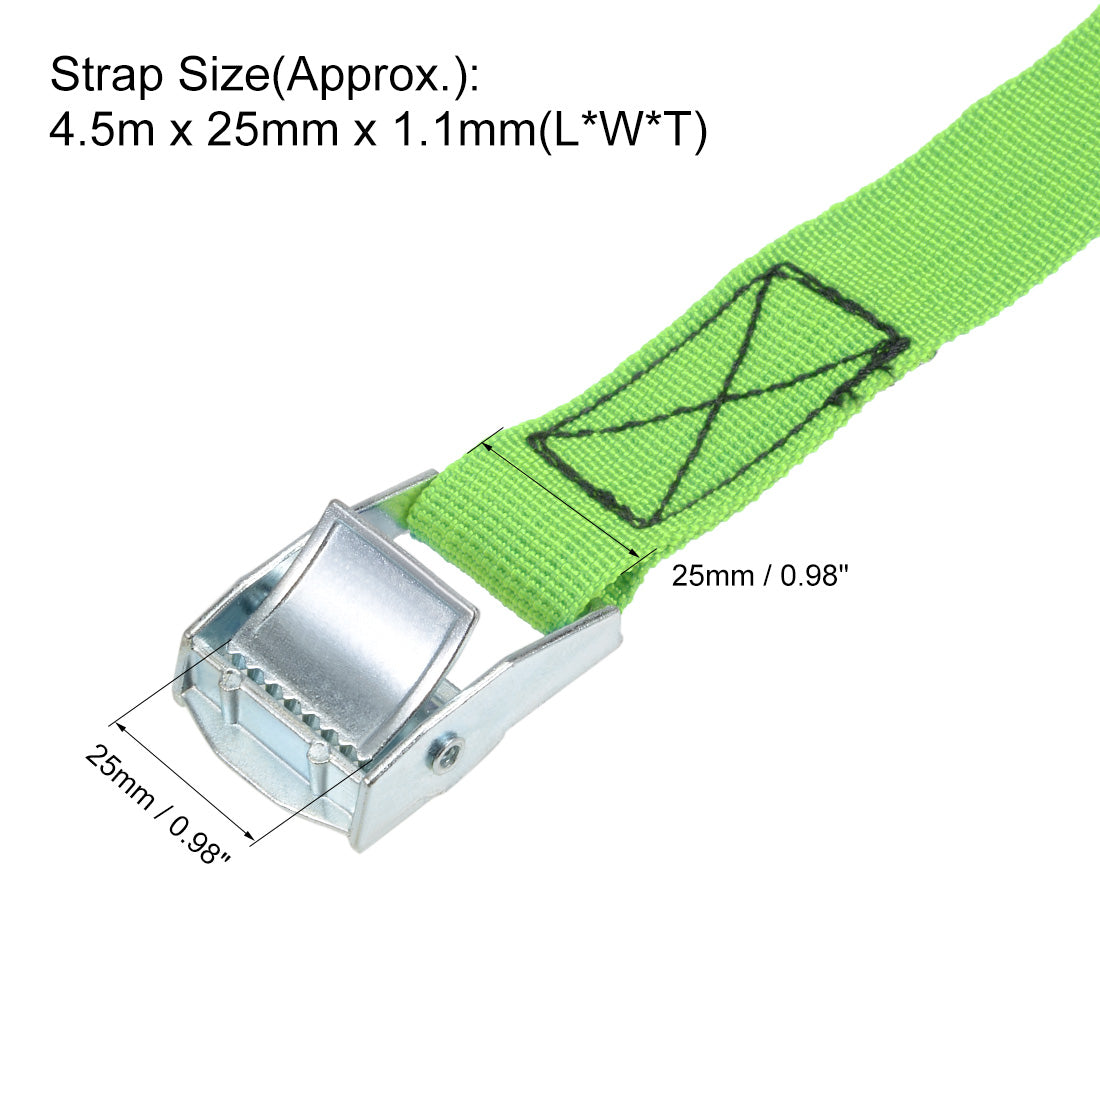 uxcell Uxcell Lashing Strap 1" x 14.7' Cargo Tie Down Straps with Cam Lock Buckle Up to 551Lbs Green 2pcs